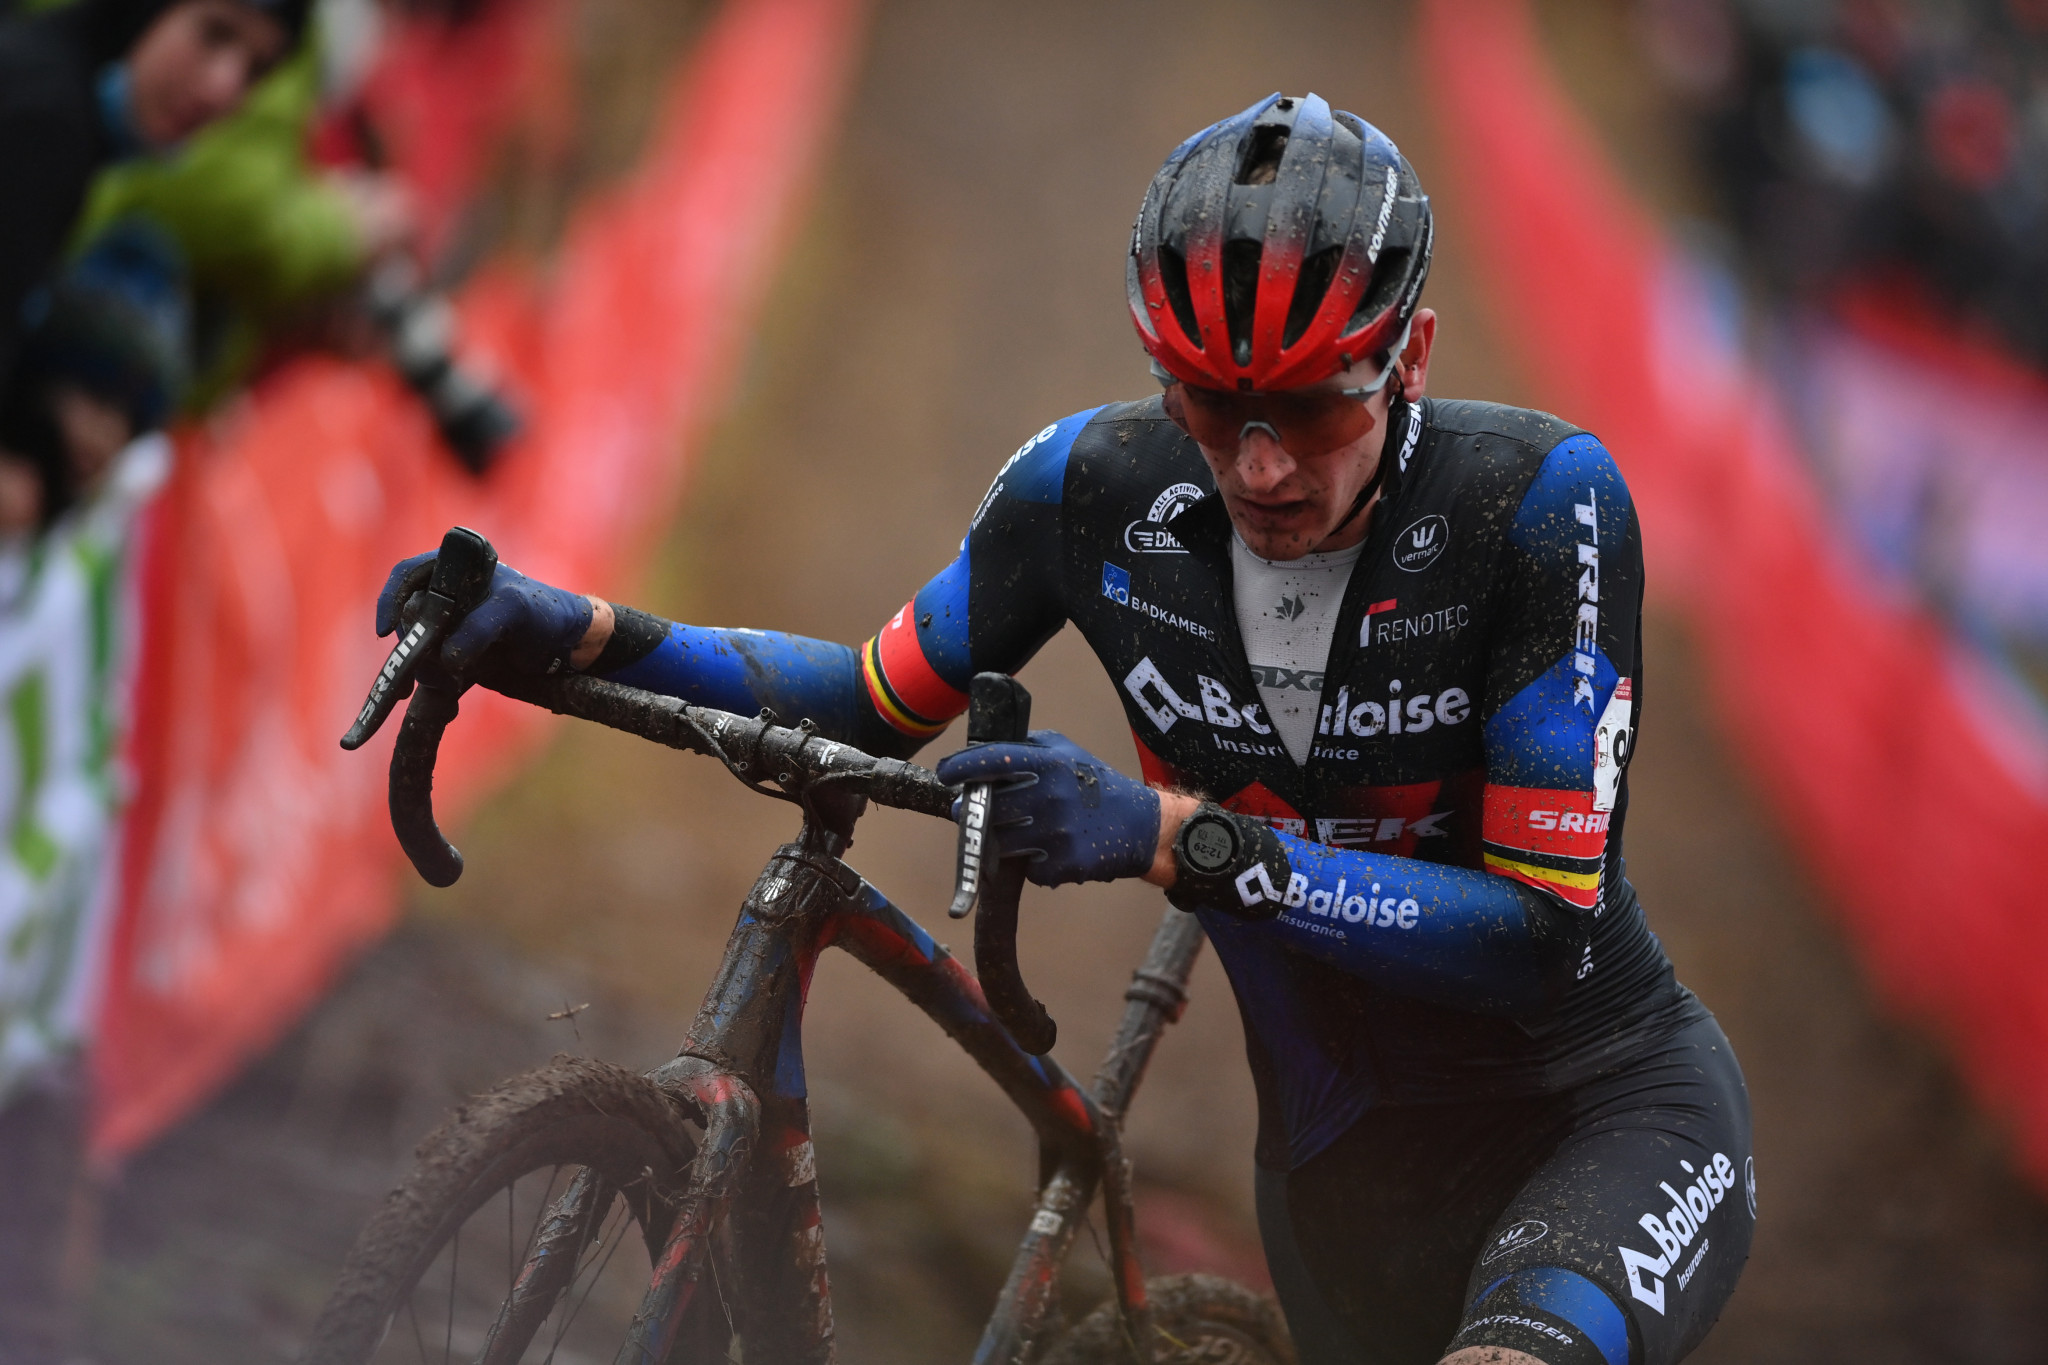 Double Cyclo-cross World Cup champion Aerts to receive two-year doping ban